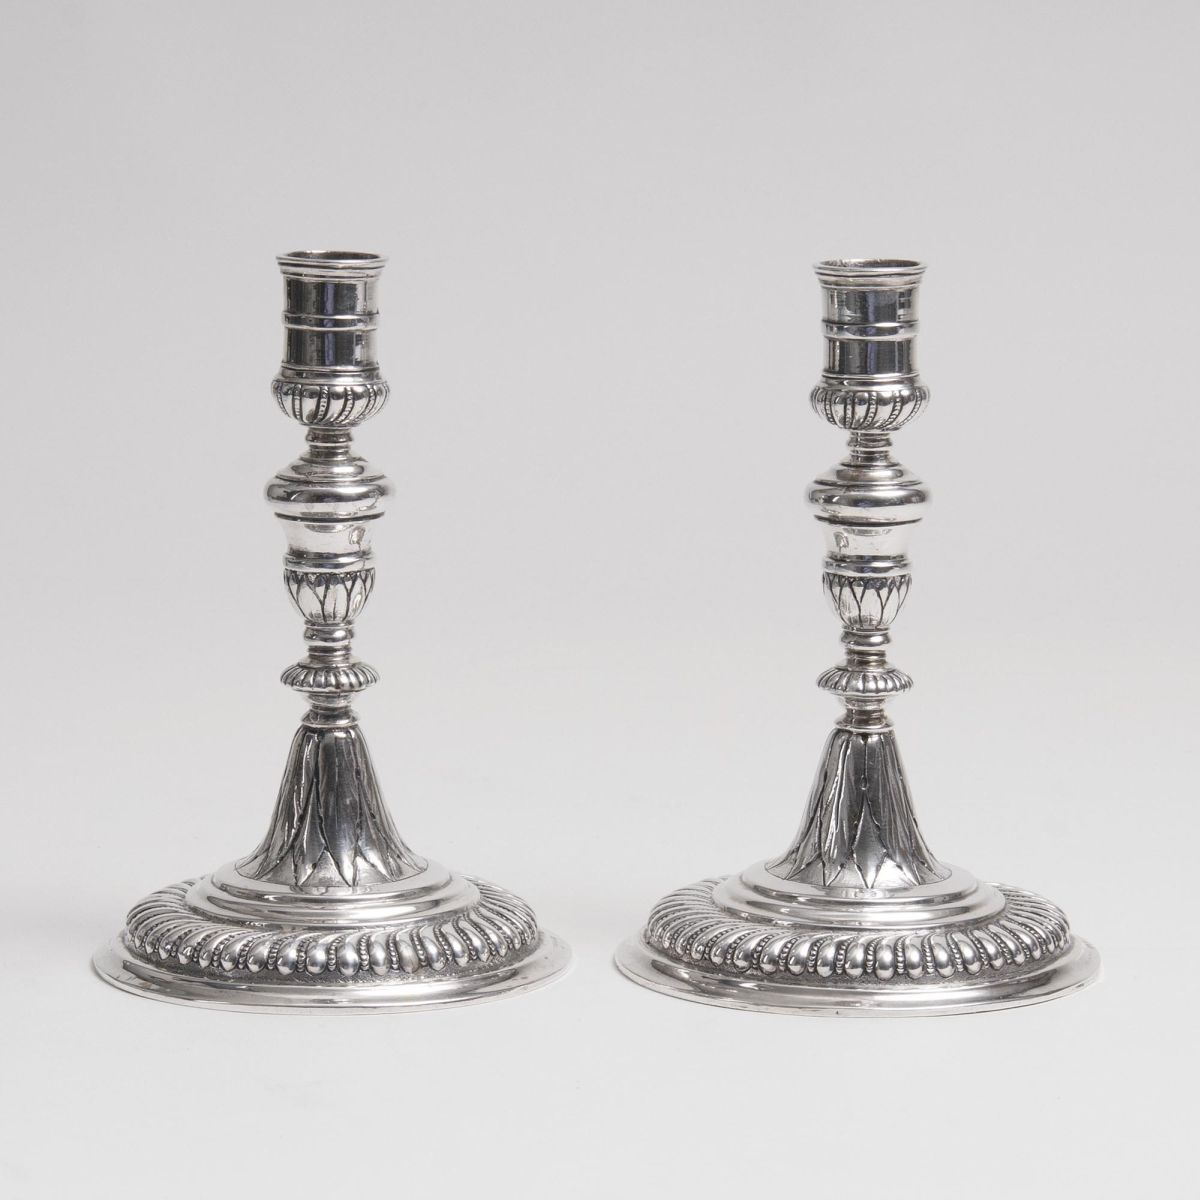 A Pair of Danisch Baroque Candle Holders